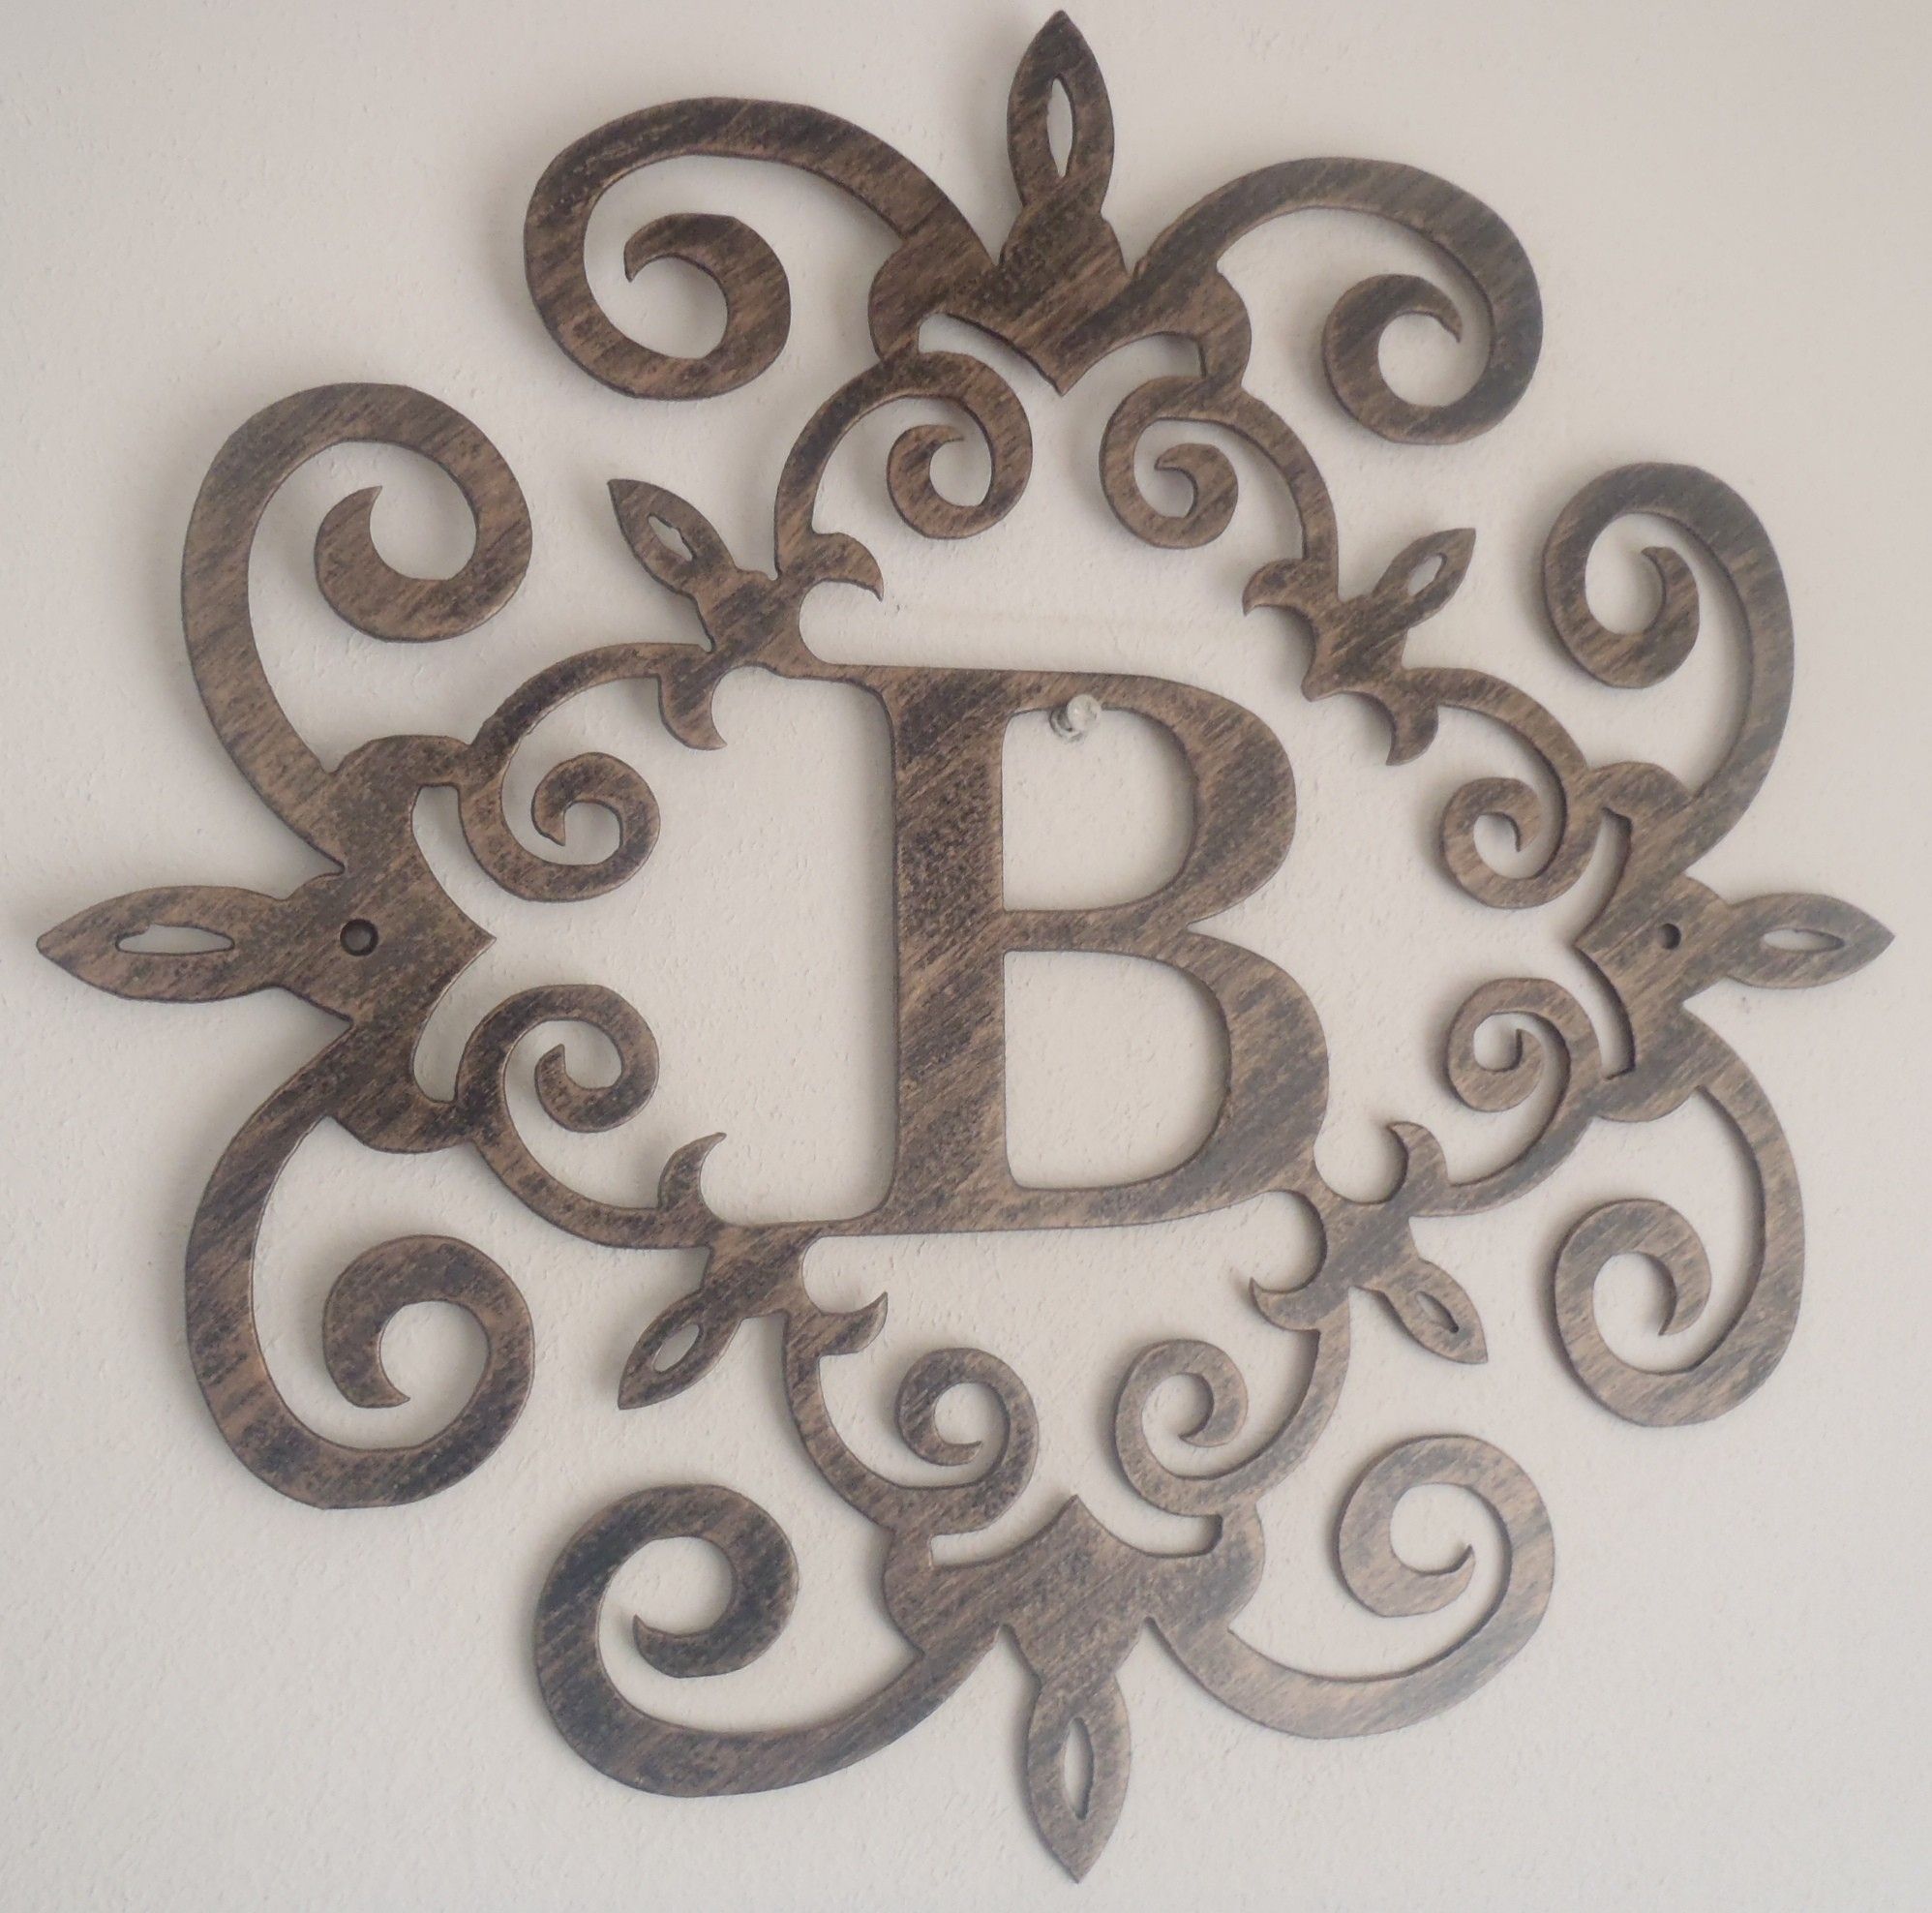 B Large Letters For Wall Decor : Bedroom Large Letters For Wall Regarding Letter Wall Art (Photo 8 of 20)